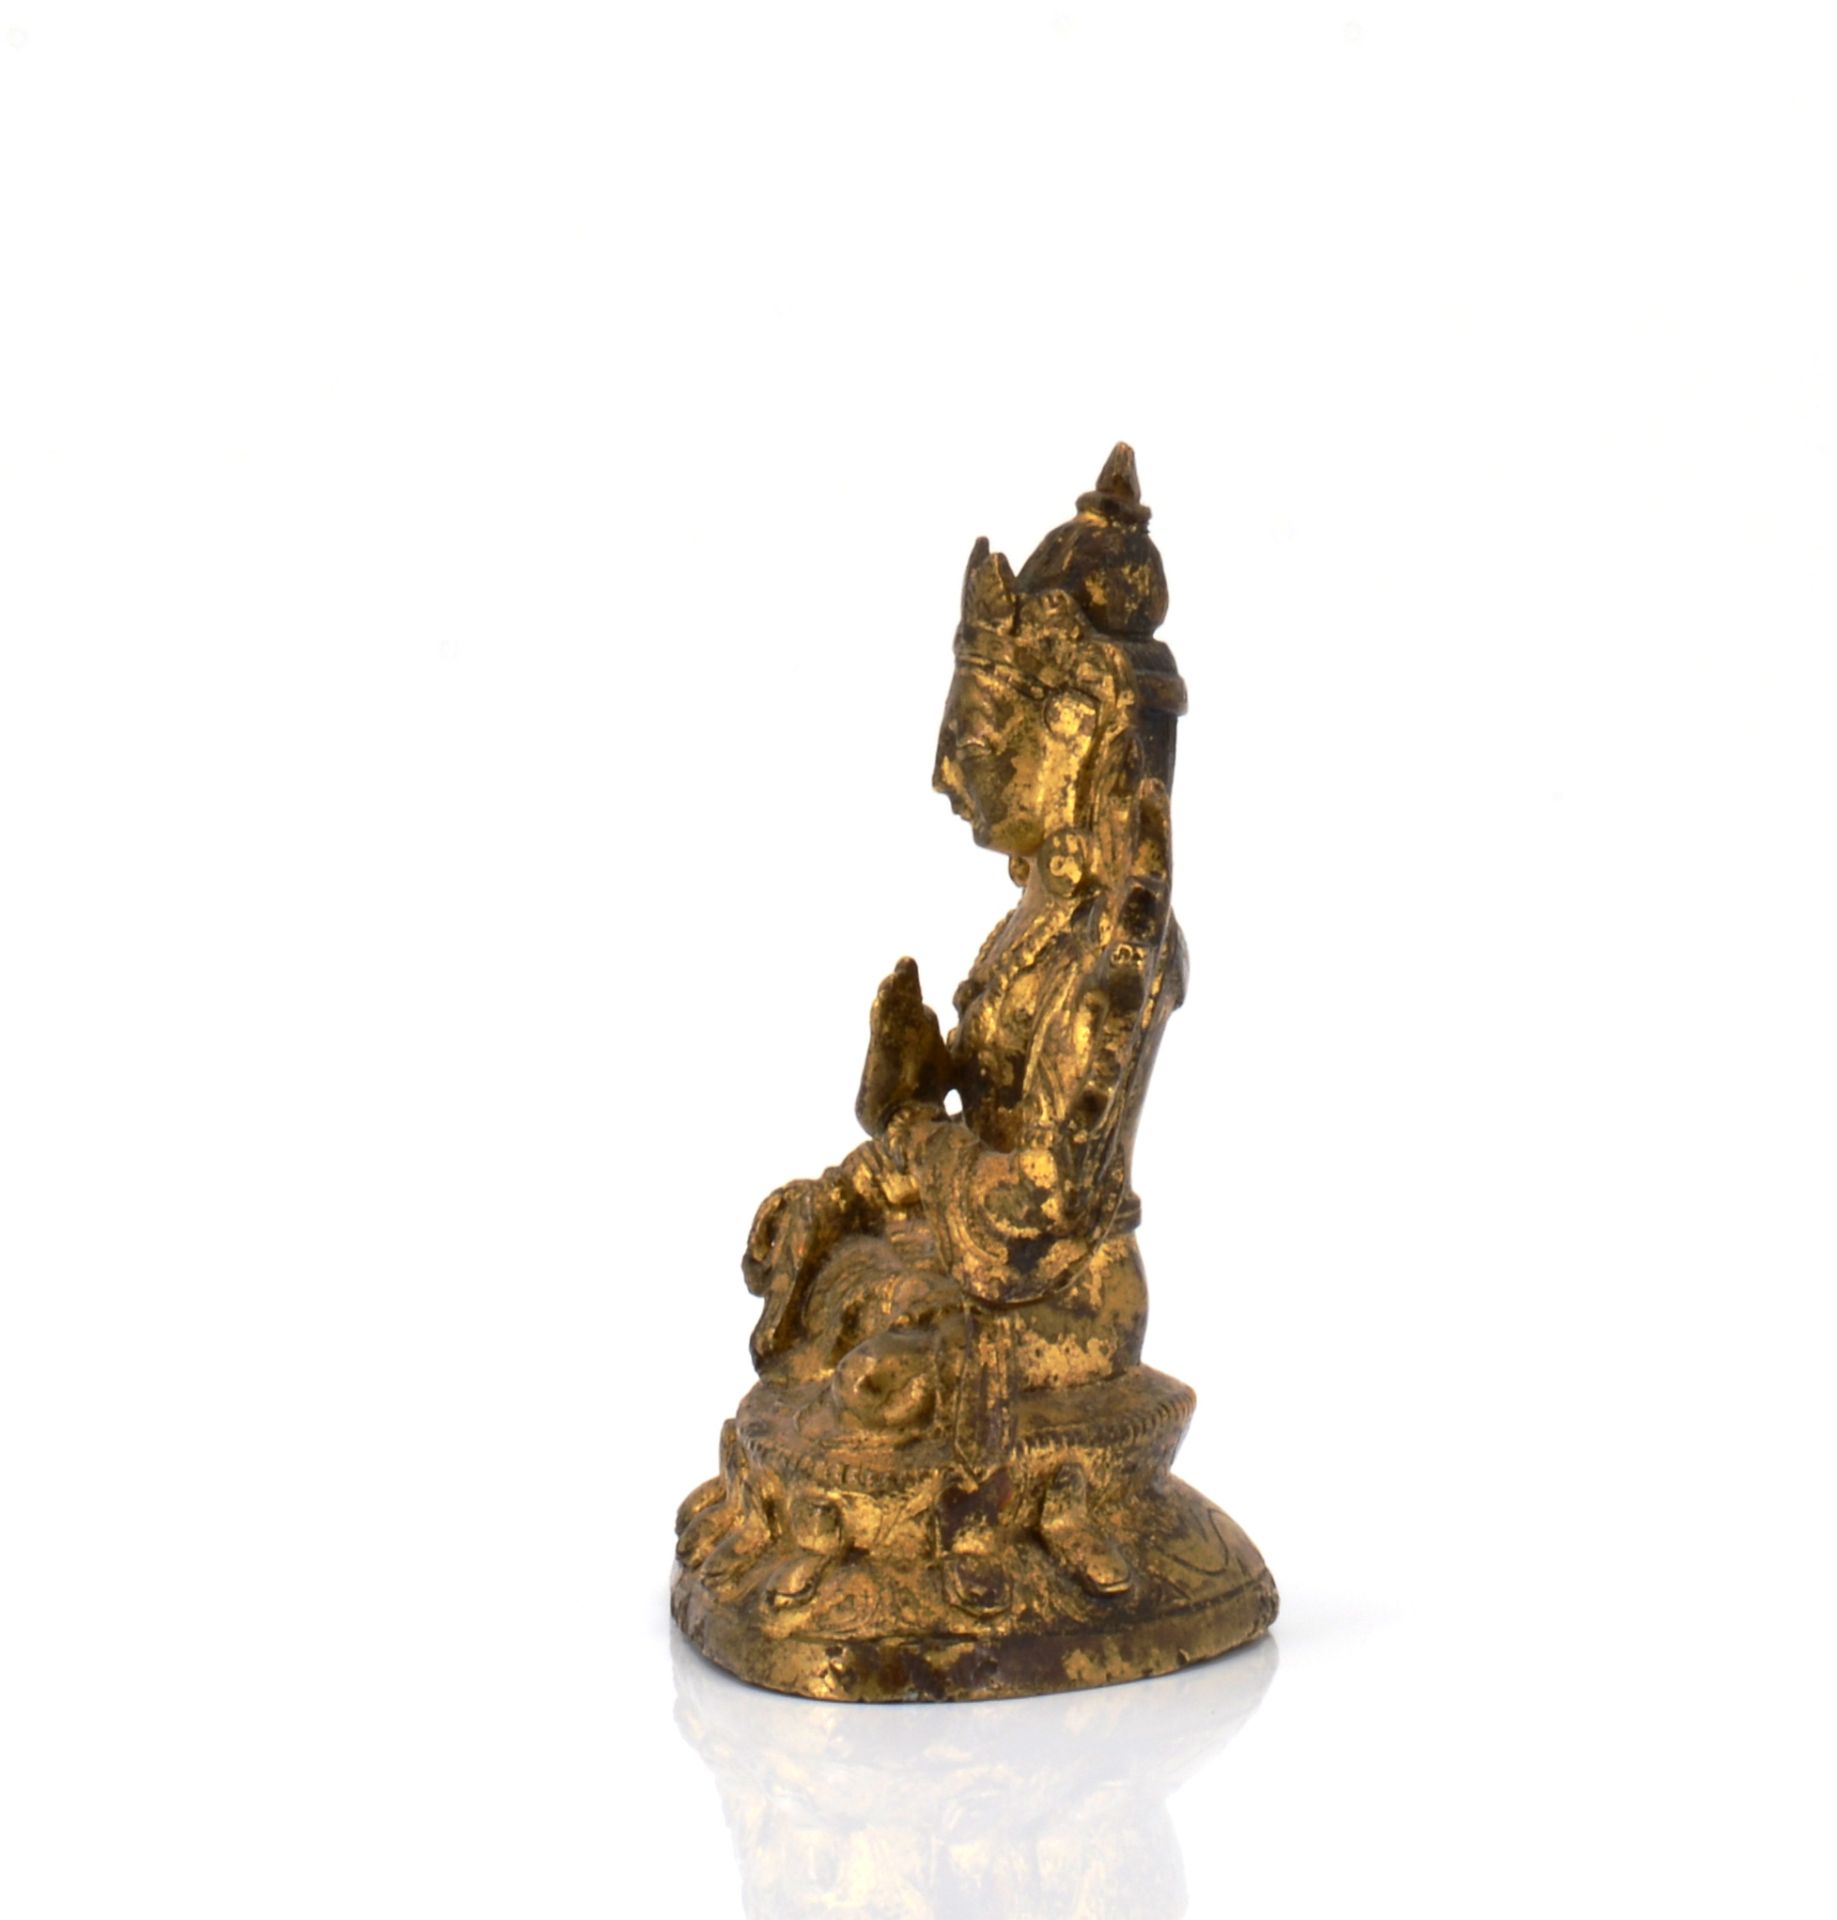 RARE DEPICTION OF SIDDHAIKAVIRA. Tibet. 18th c. Fire gilt old bronze. Base closed underneath prob. - Image 3 of 6